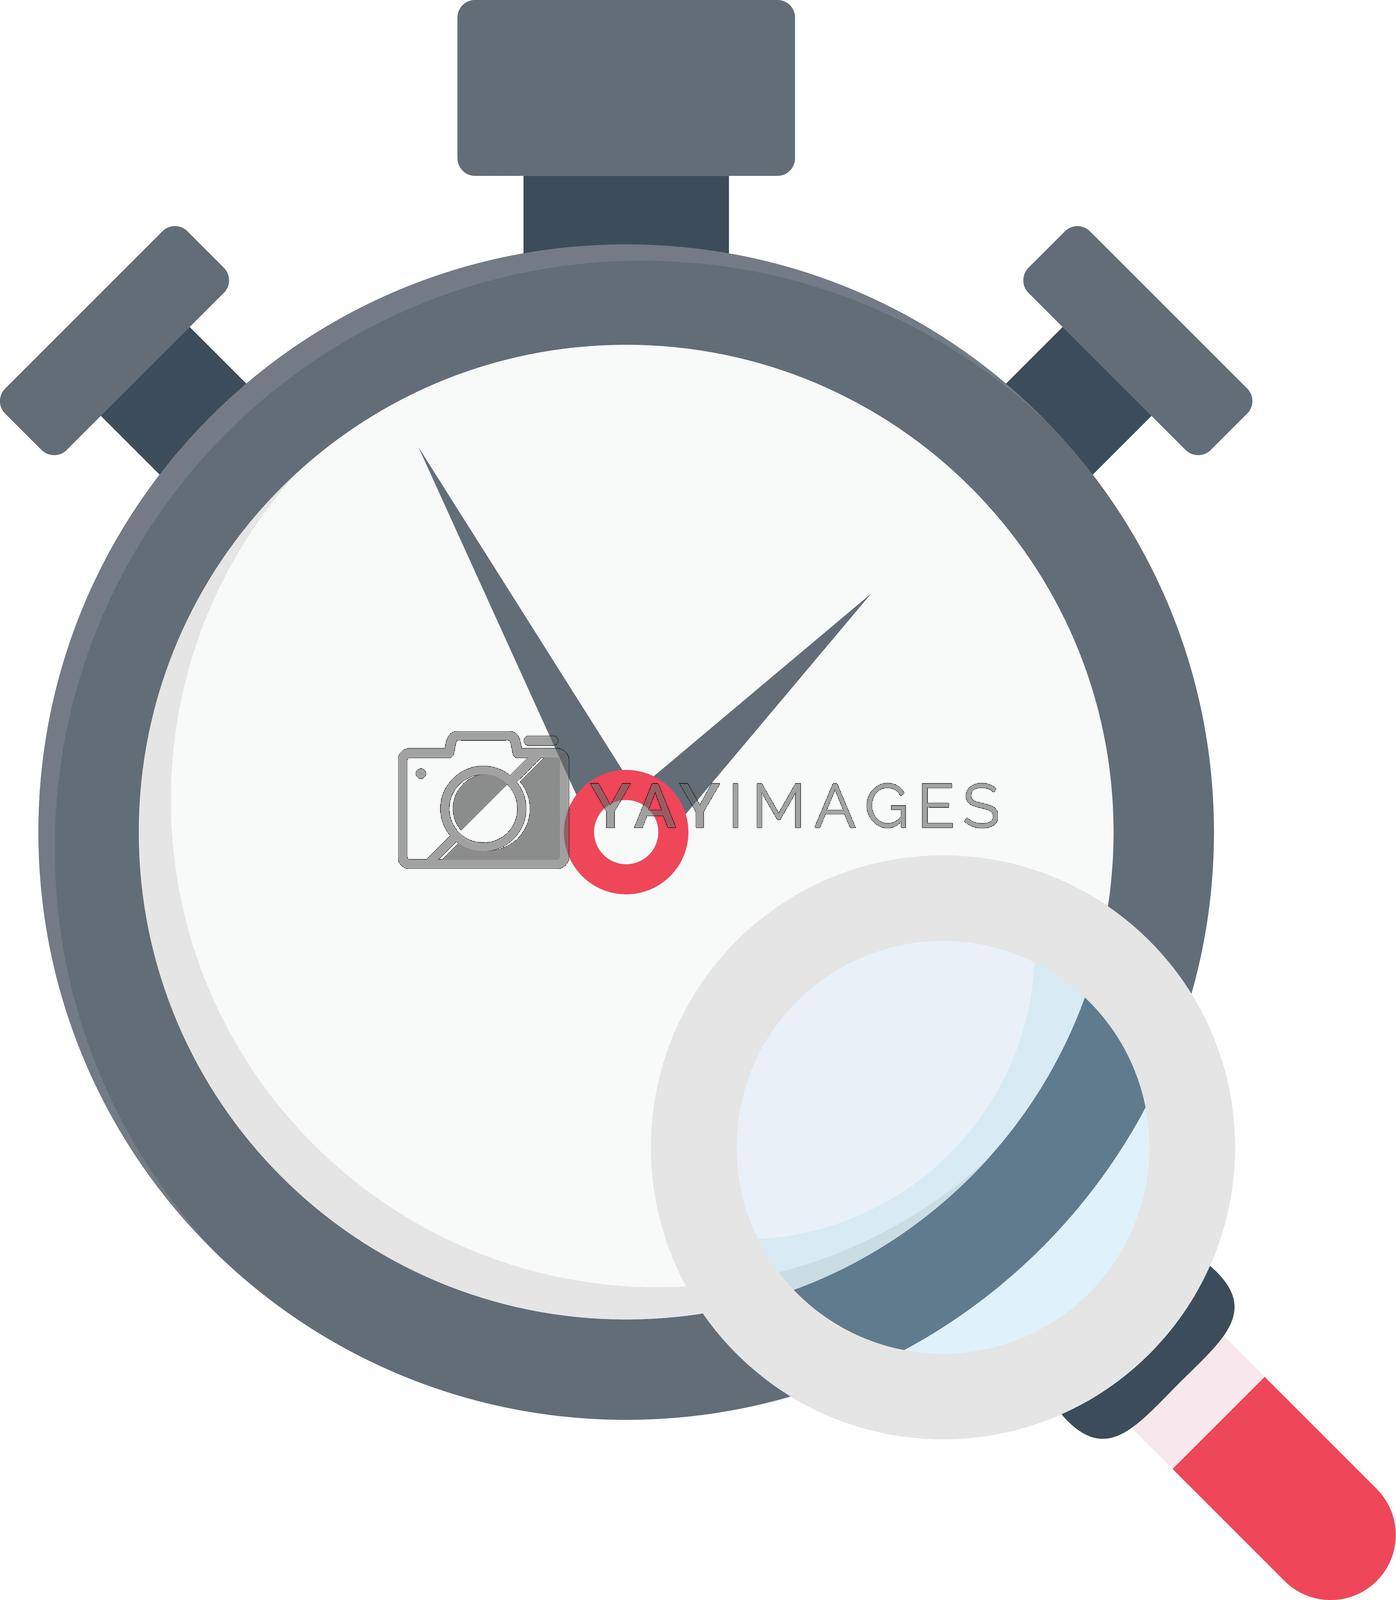 Royalty free image of stopwatch by vectorstall